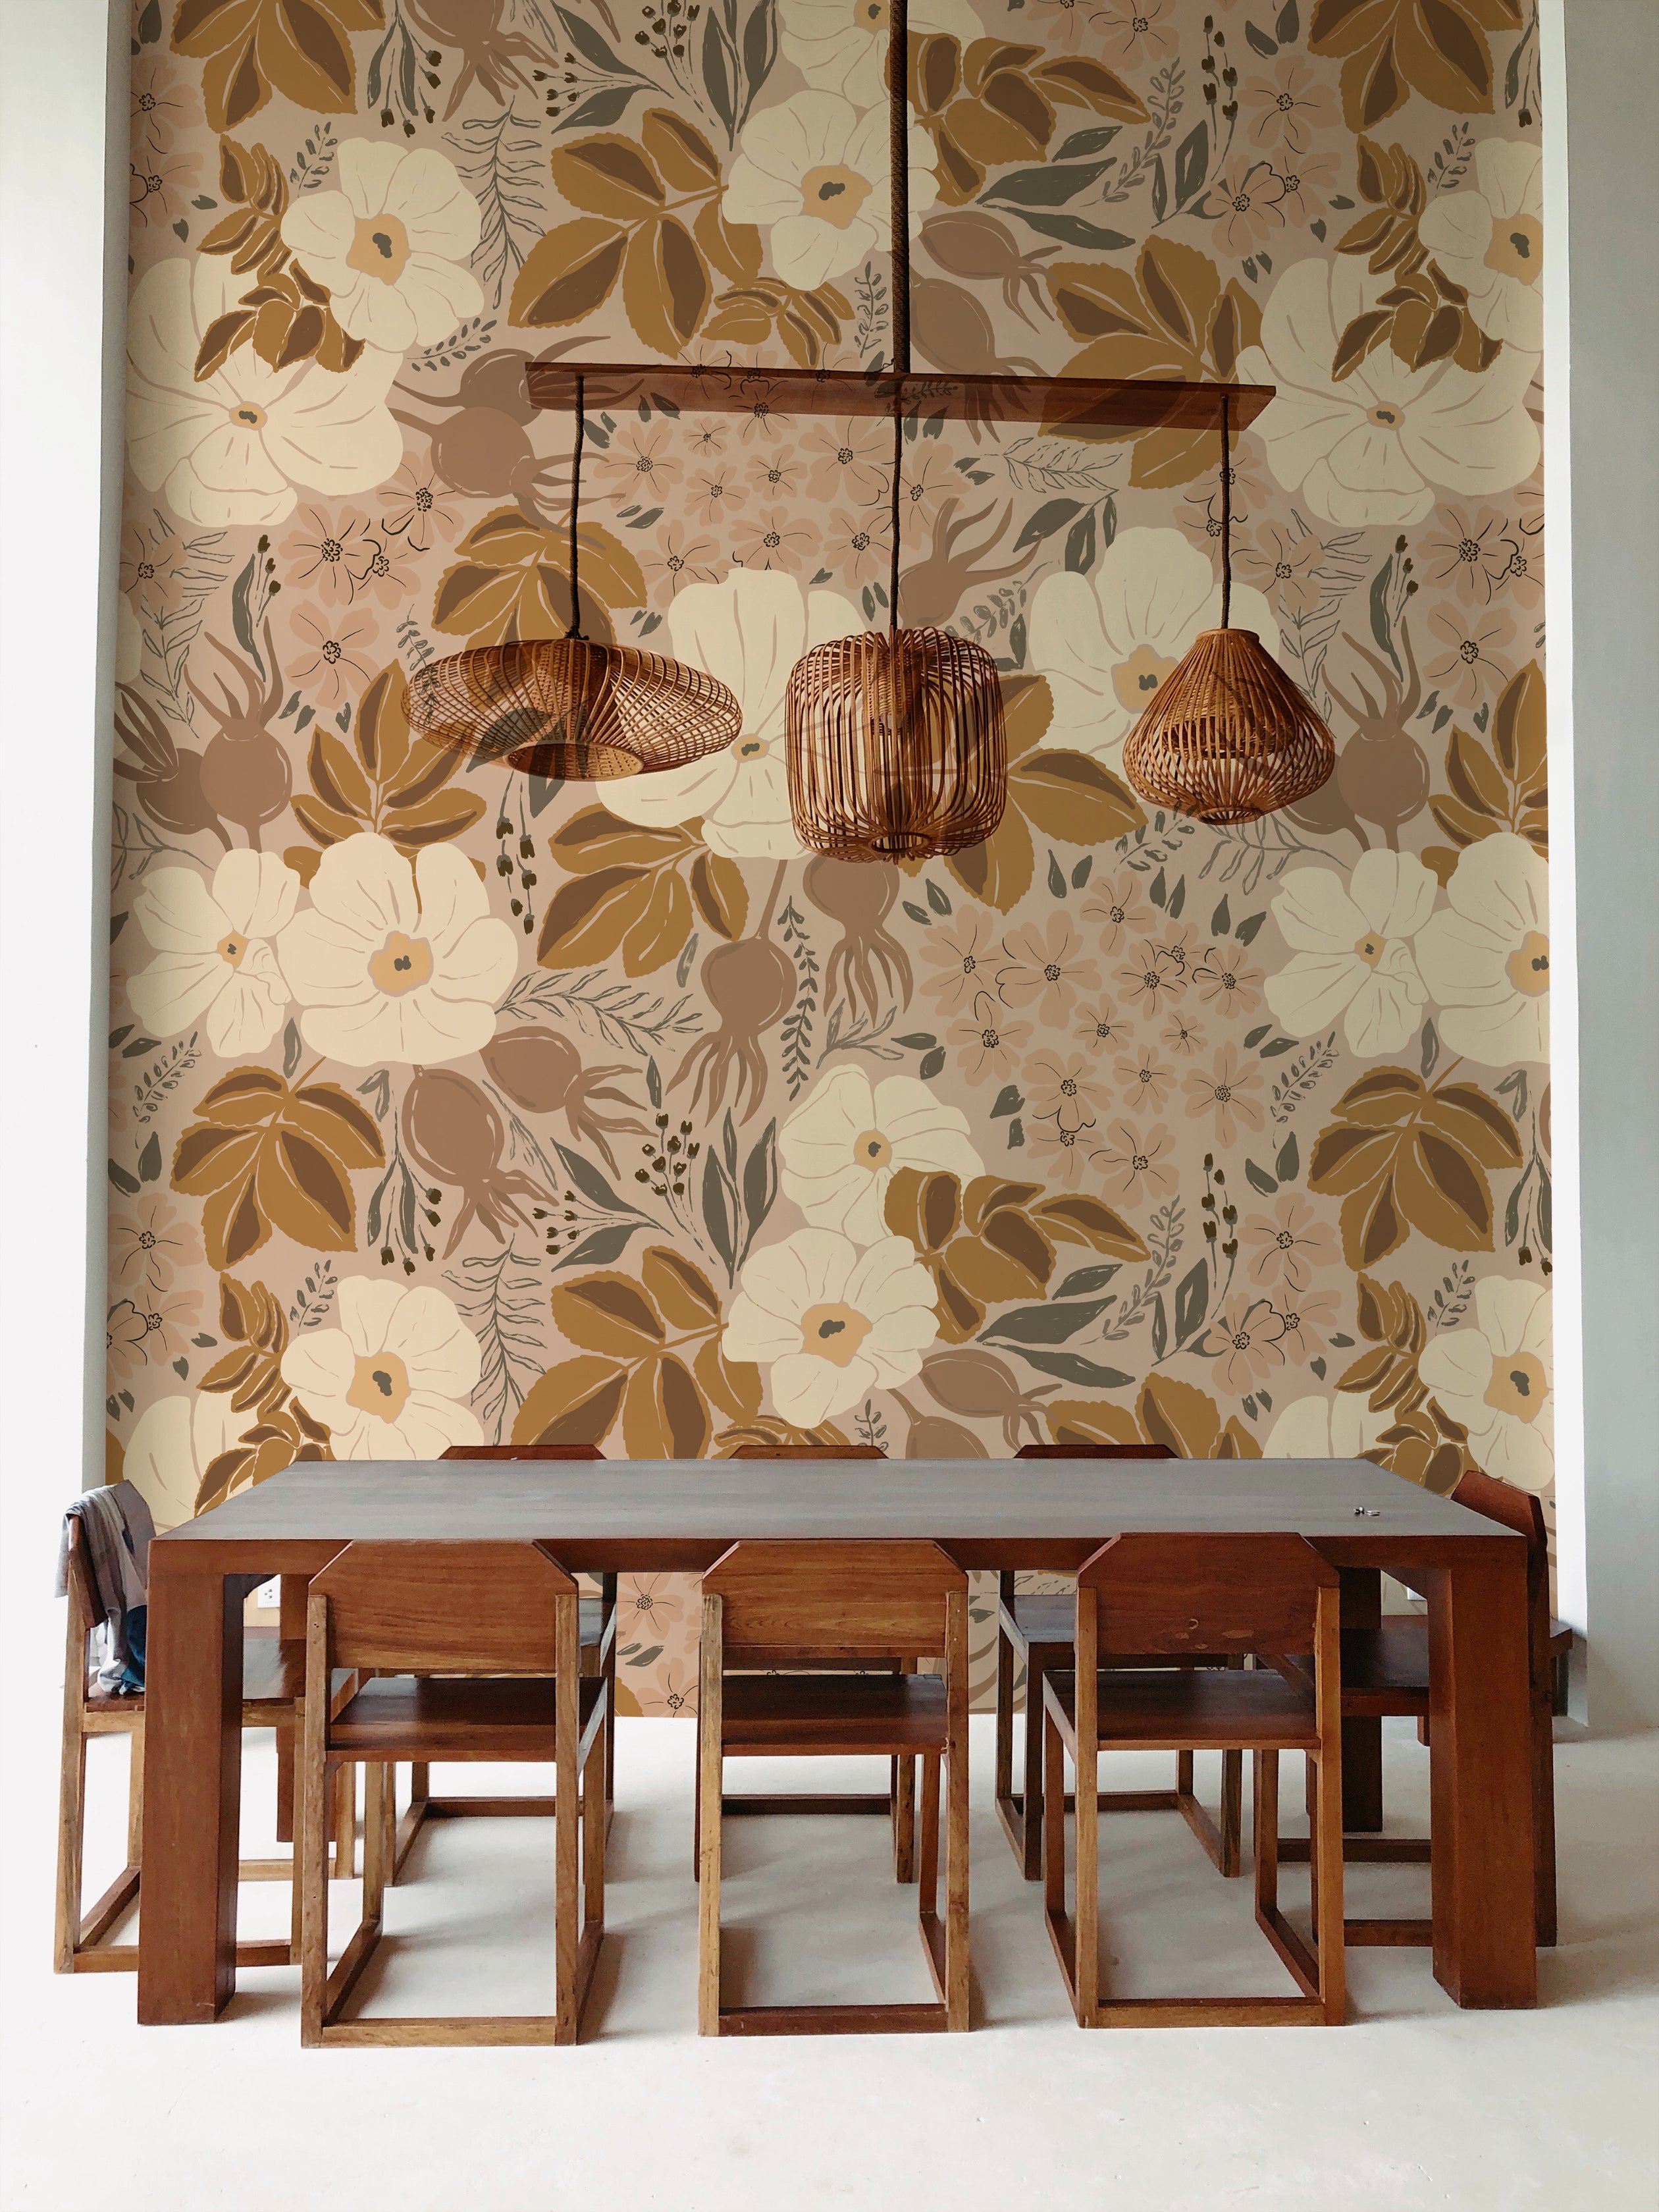 A stylish dining room featuring a large, bold floral wallpaper with neutral tones. The room includes a dark wooden dining table, flanked by matching chairs, under unique woven pendant lights.